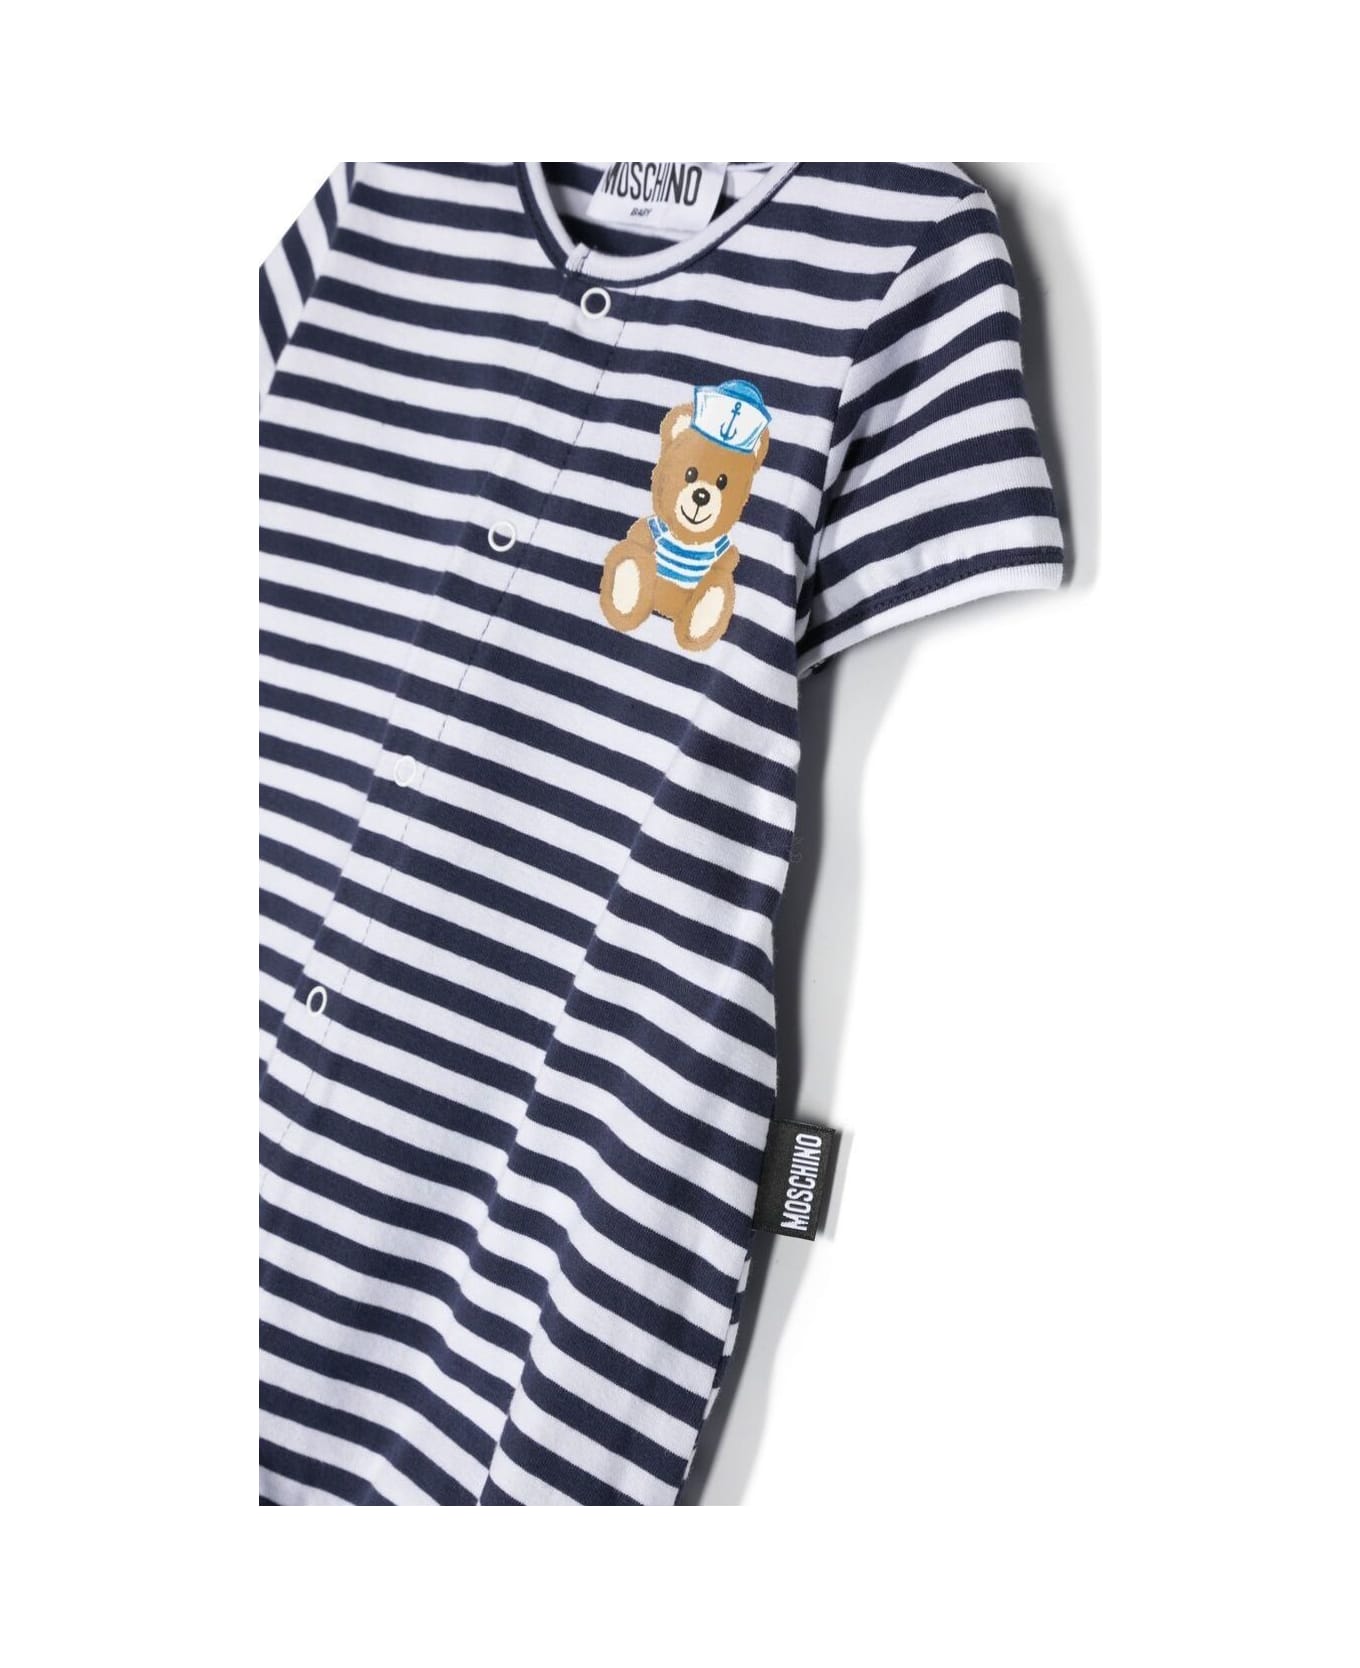 Moschino Stripe Print Romper With Teddy Bear In White Cotton Baby - Multicolor